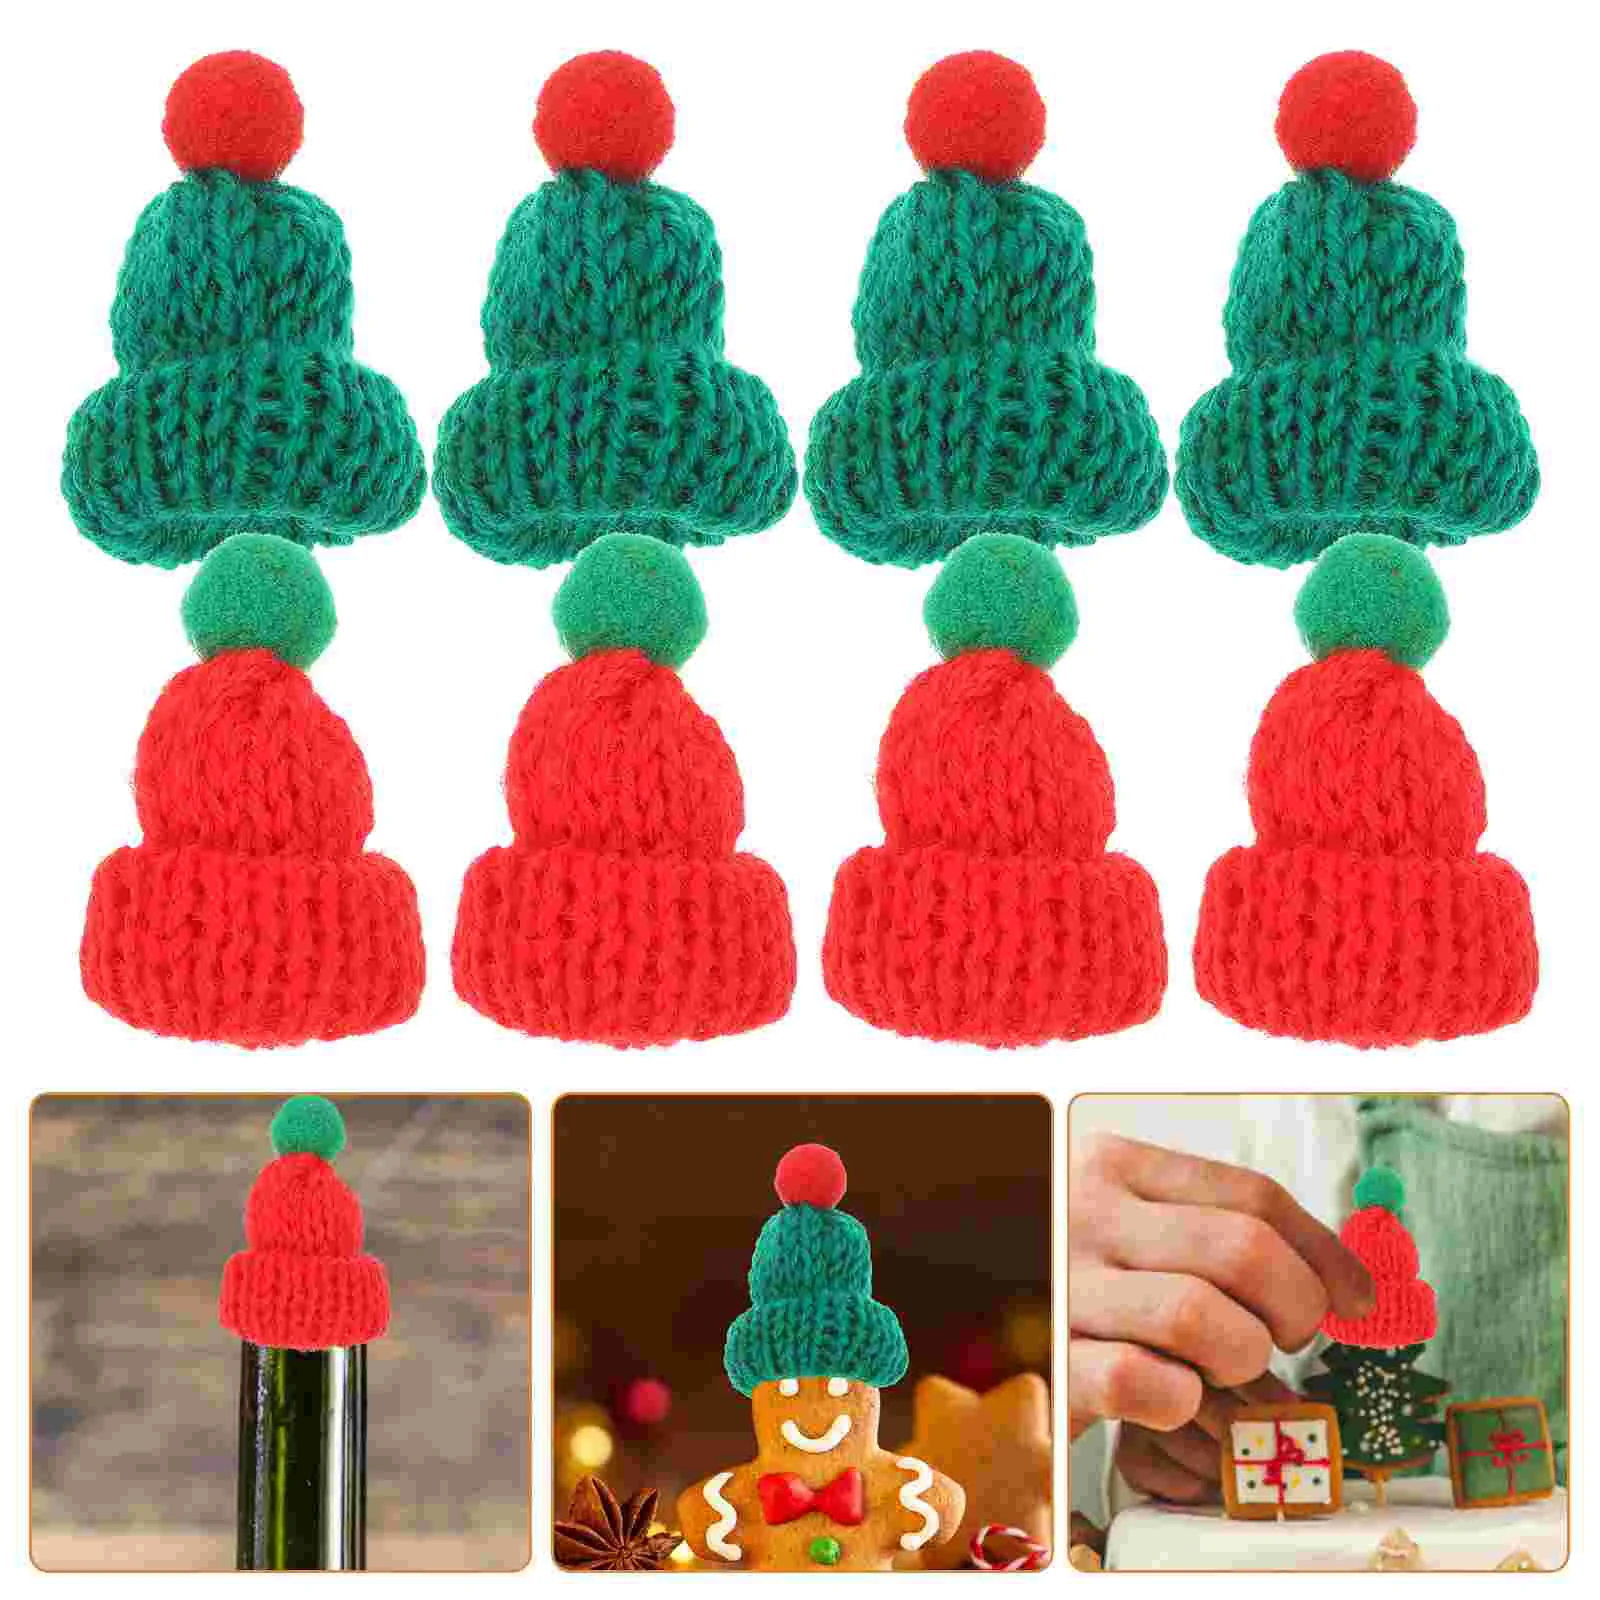 

100 Pcs Mini Beanie Xmas Bottle Cover Miniature Hat Christmas Decor Crafts The Gift Knitted Decorate